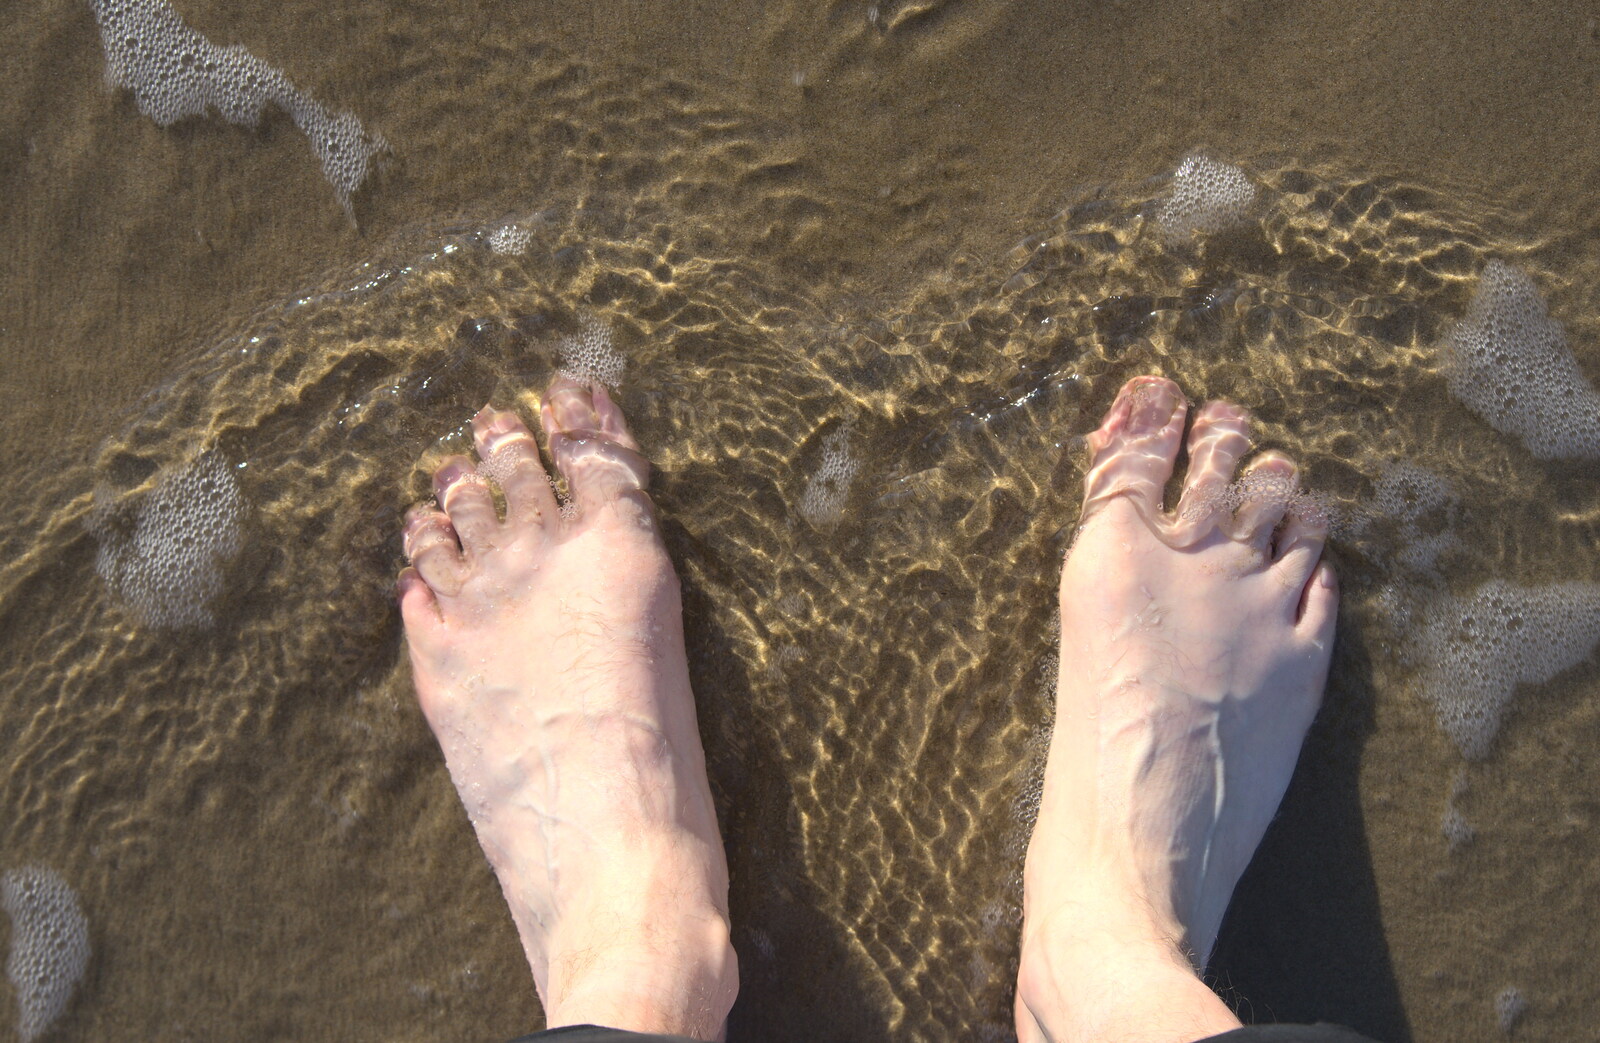 Nosher's feet in the sea from Camping at Silver Strand, Wicklow, County Wicklow, Ireland - 7th August 2014